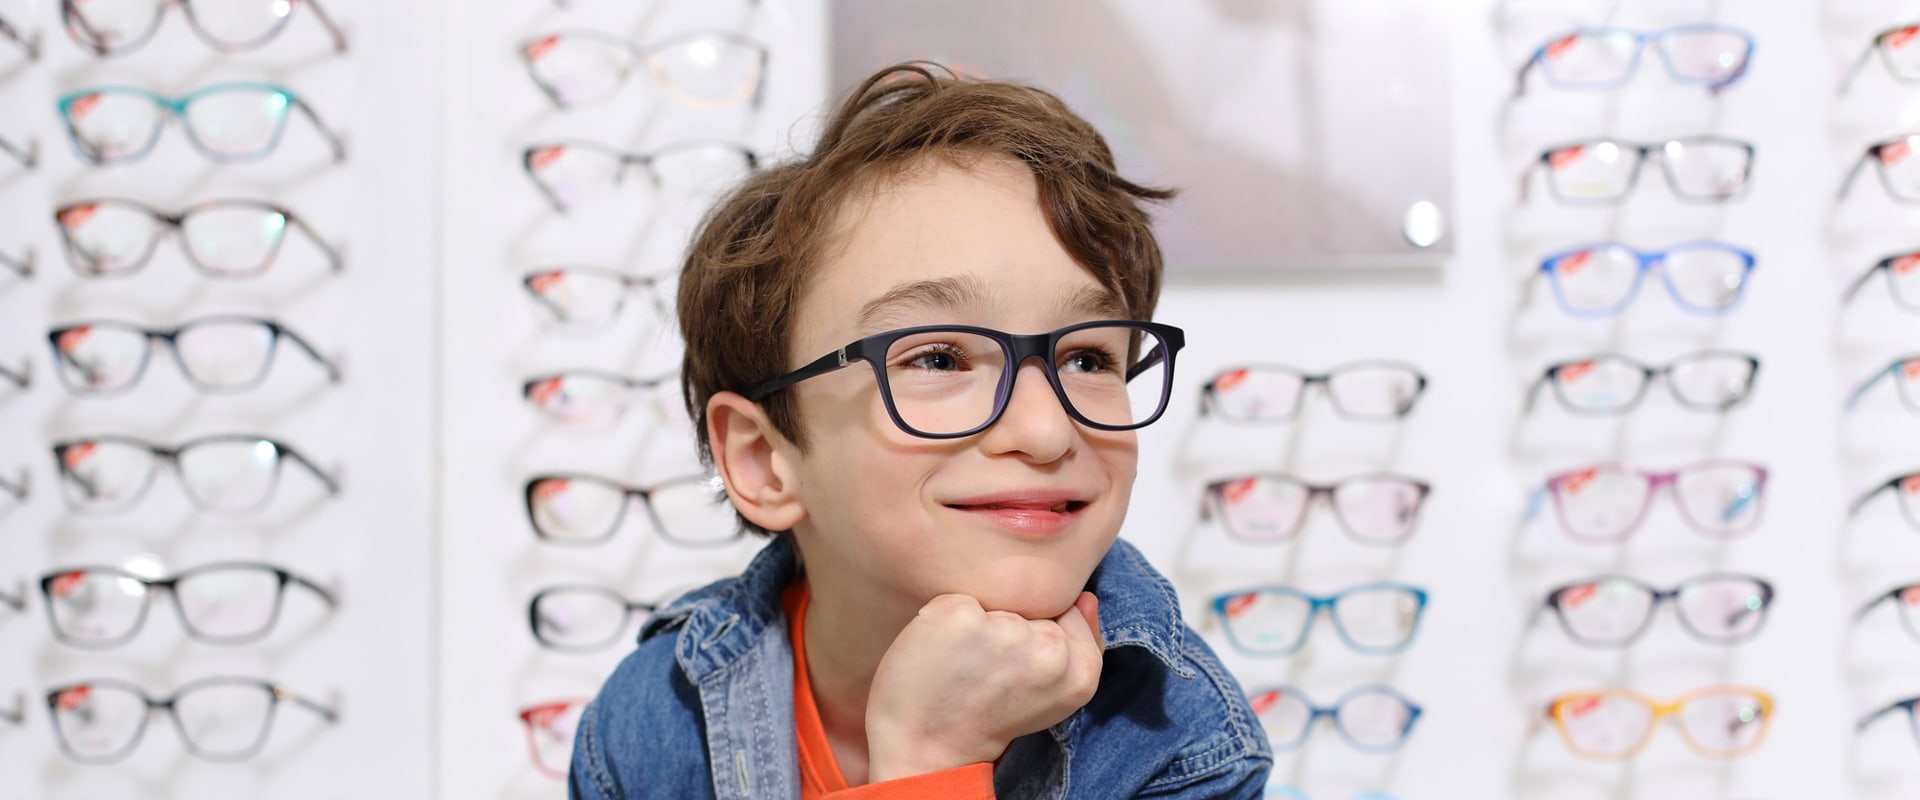 Choosing the Perfect Eyeglasses and Contact Lenses for Kids